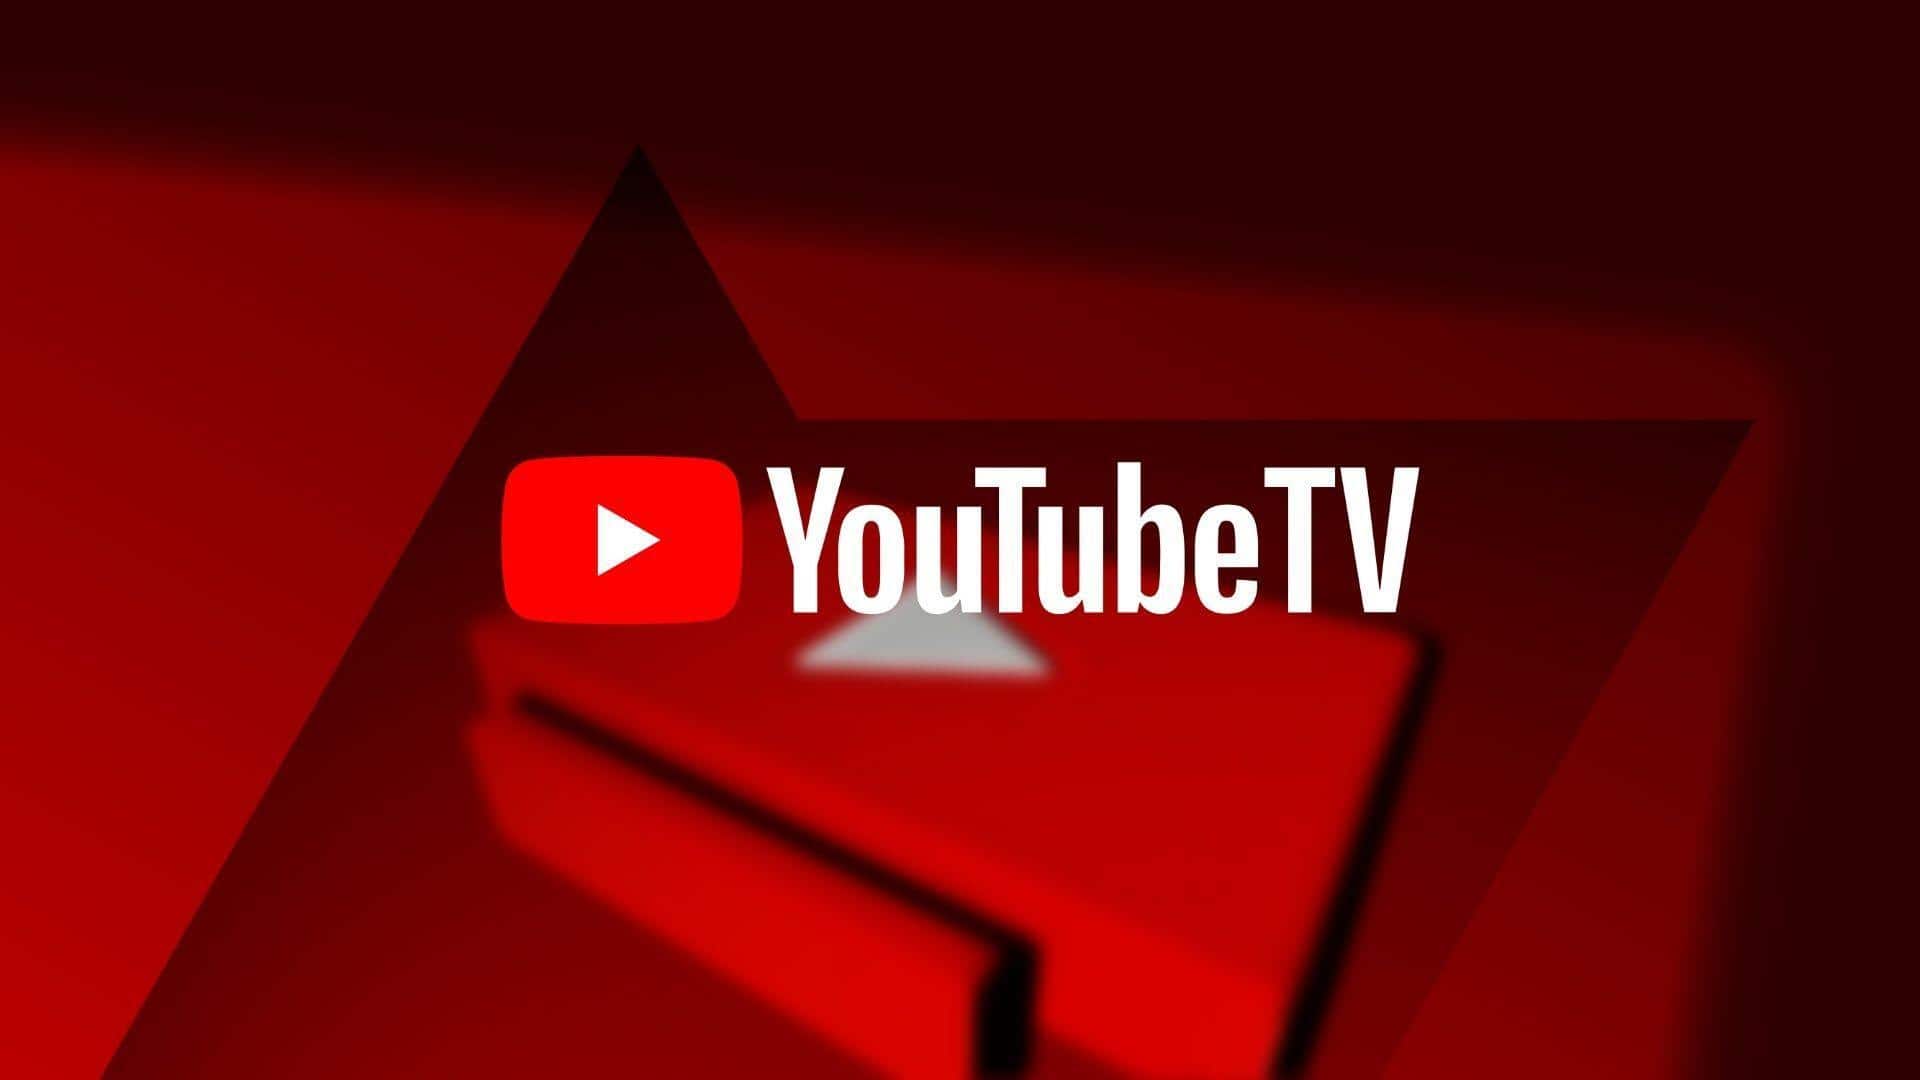 YouTube TV lets users pick which games to watch simultaneously